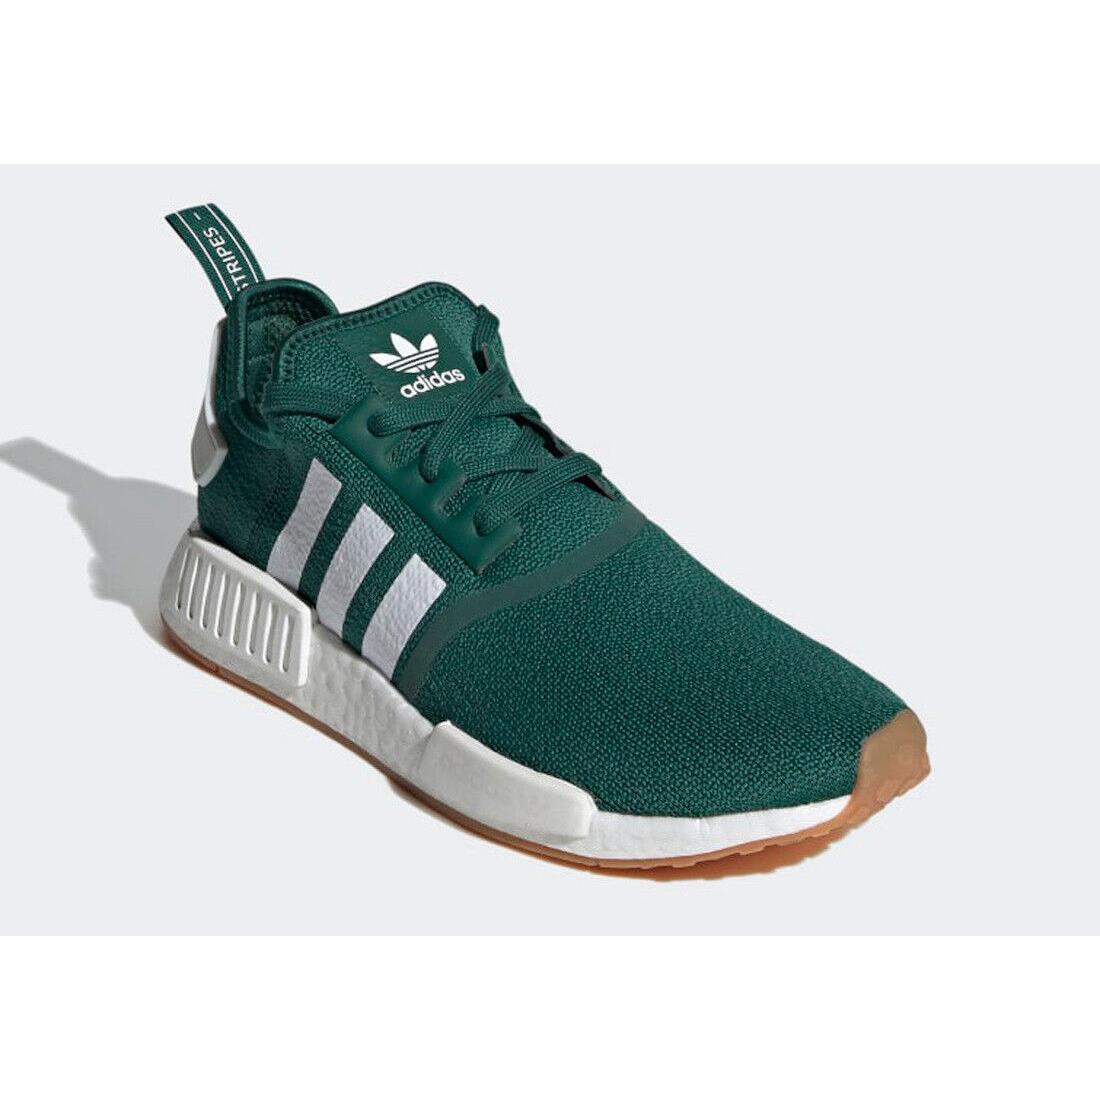 Adidas shoes NMD - Green 2